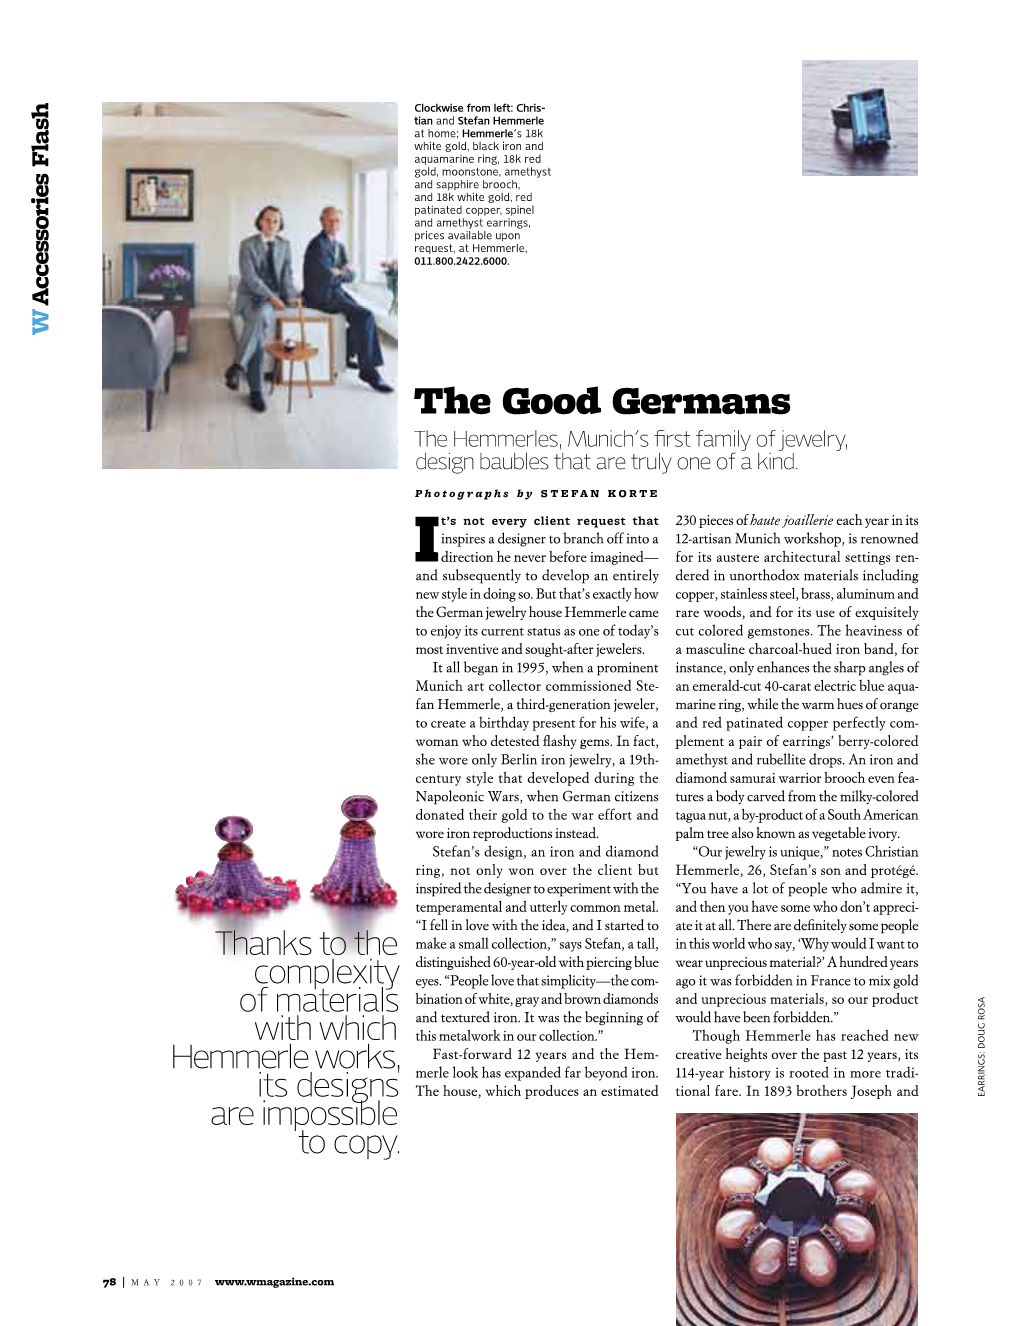 The Good Germans the Hemmerles, Munich’S First Family of Jewelry, Design Baubles That Are Truly One of a Kind